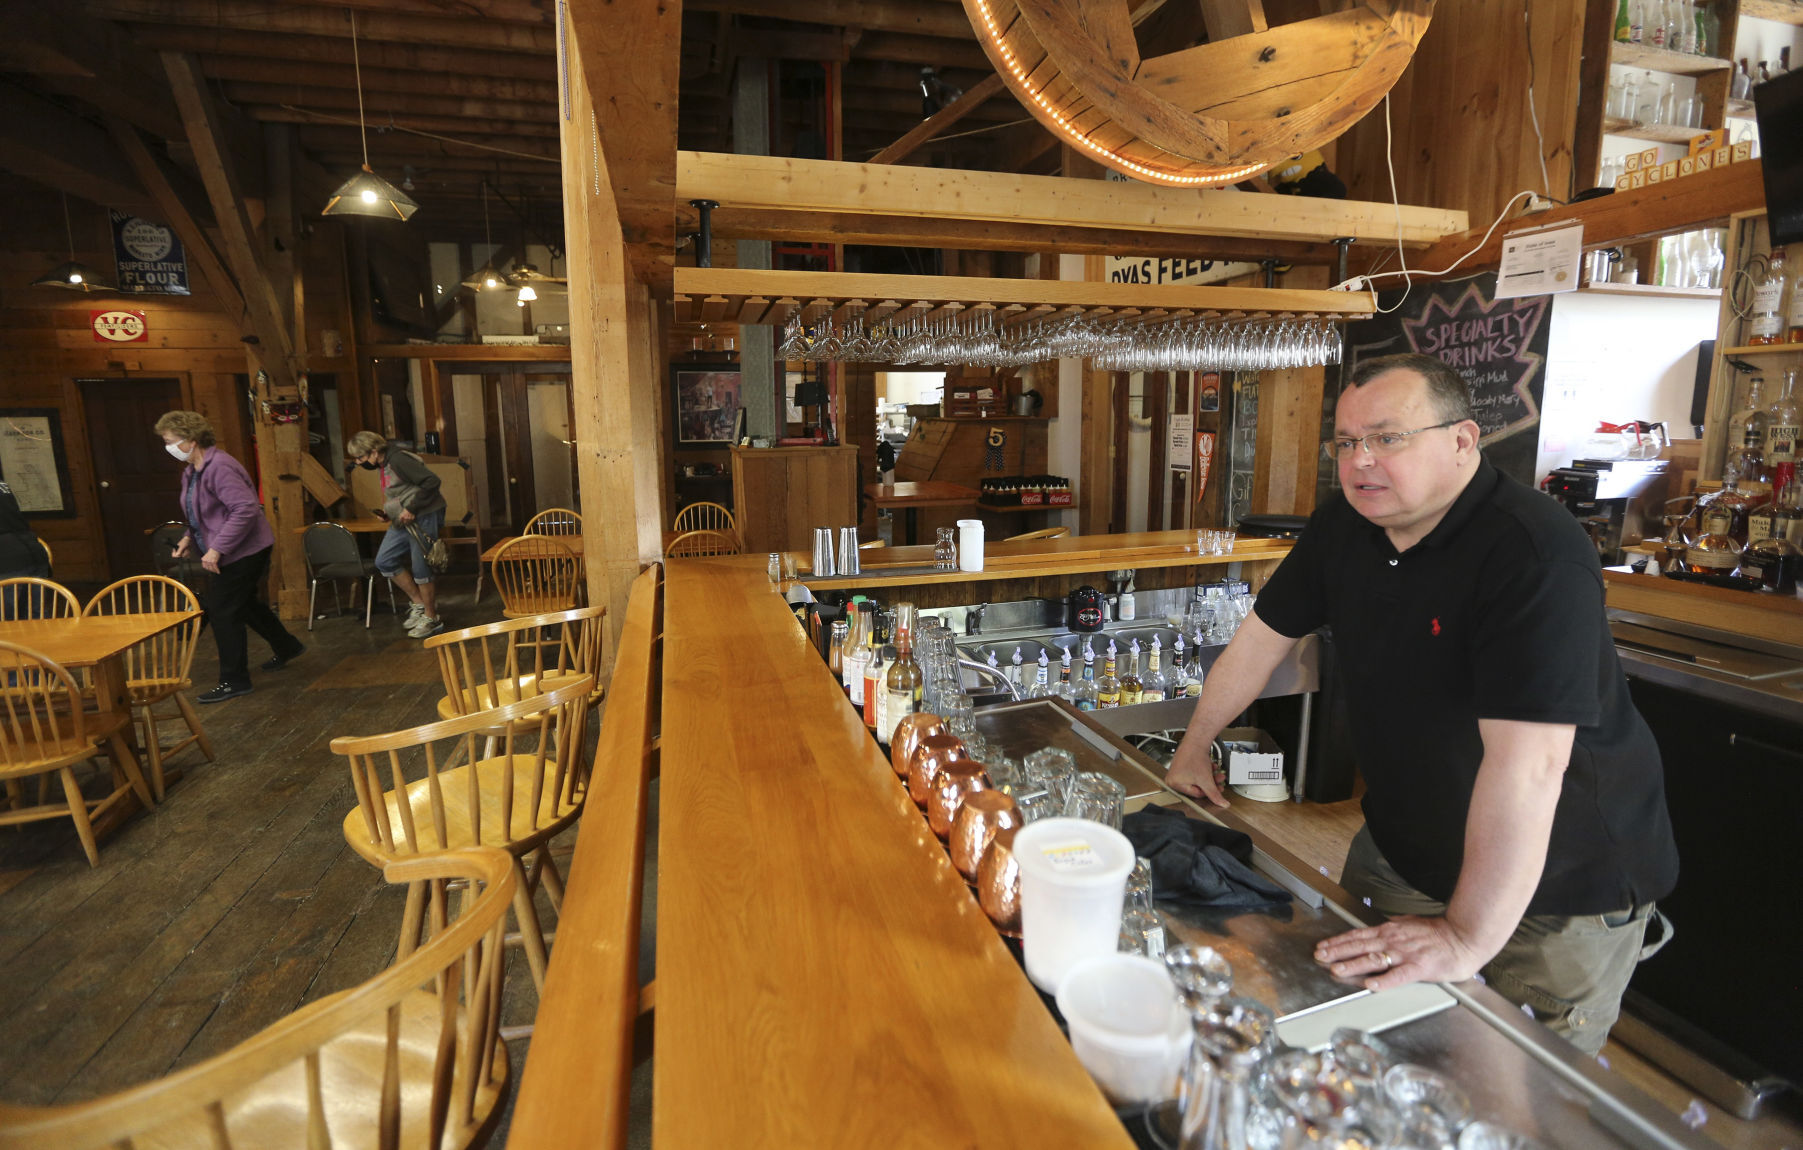 Mark Herman, owner and manager of Flatted Fifth Blues & BBQ in Bellevue, Iowa, tends bar during lunch hour Thursday. Herman has seen “a gradual increase” in customers. PHOTO CREDIT: Dave Kettering